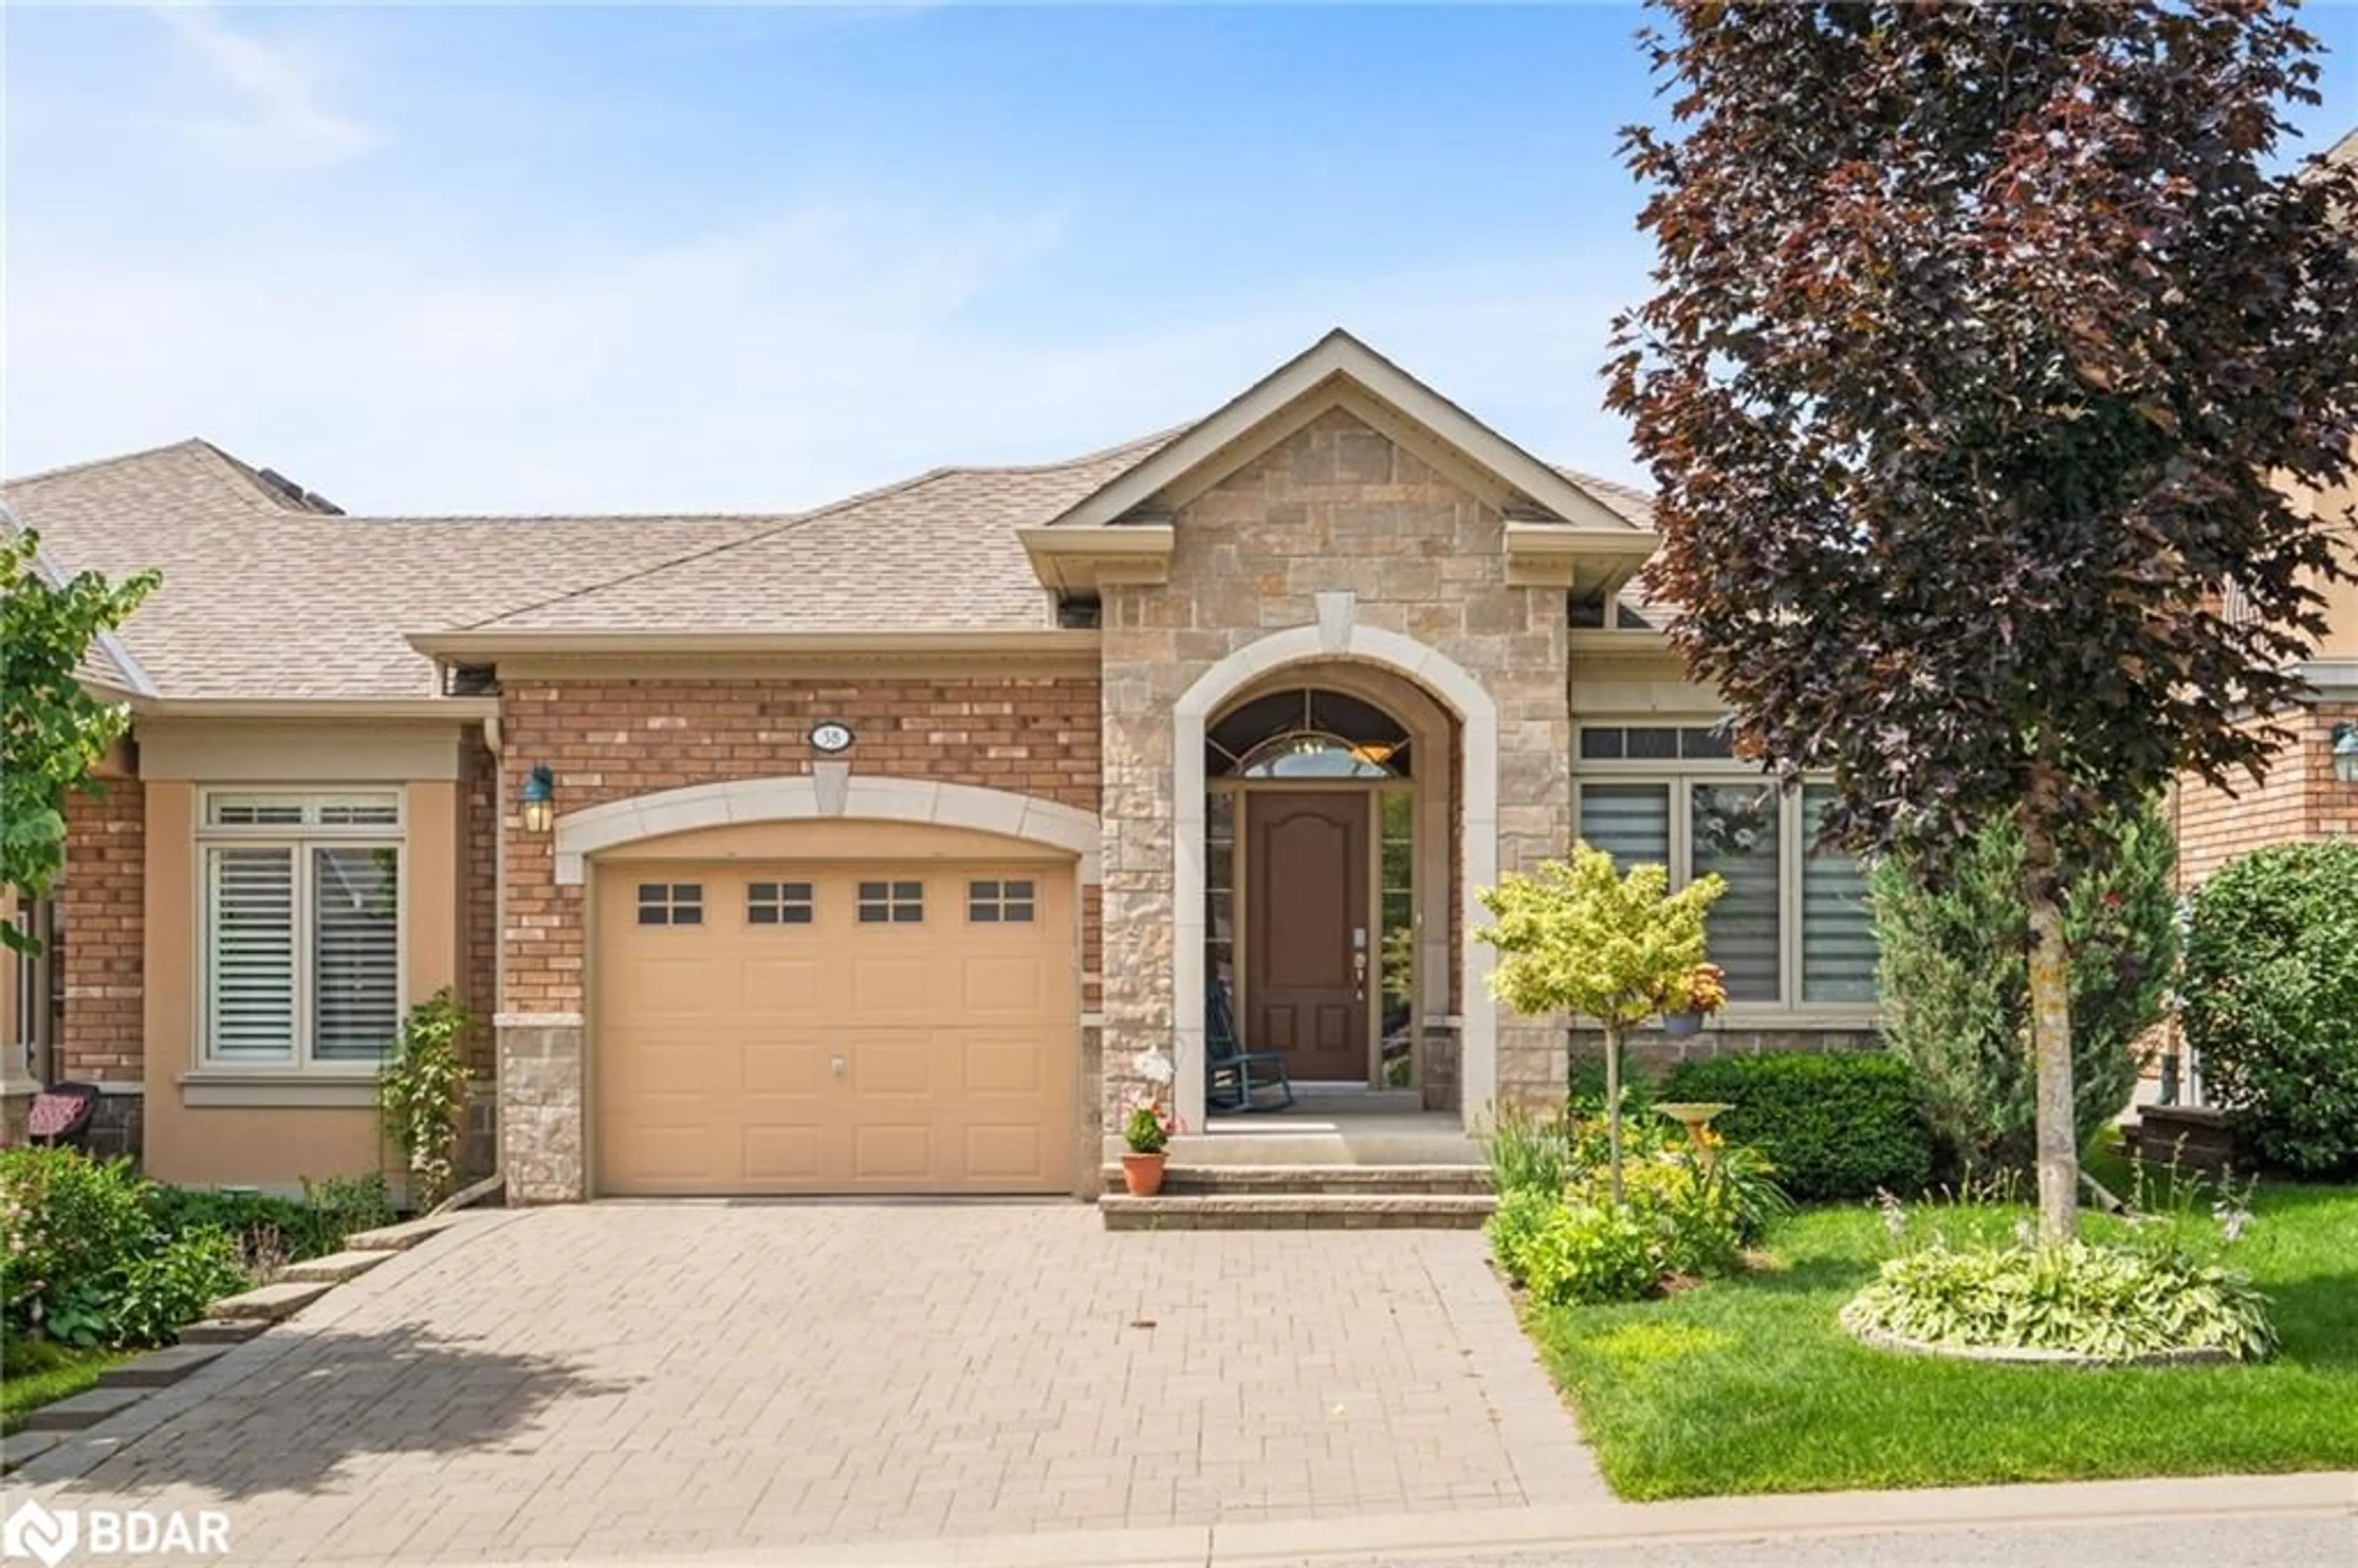 Home with brick exterior material for 38 Hillcrest Dr, Alliston Ontario L9R 0N4